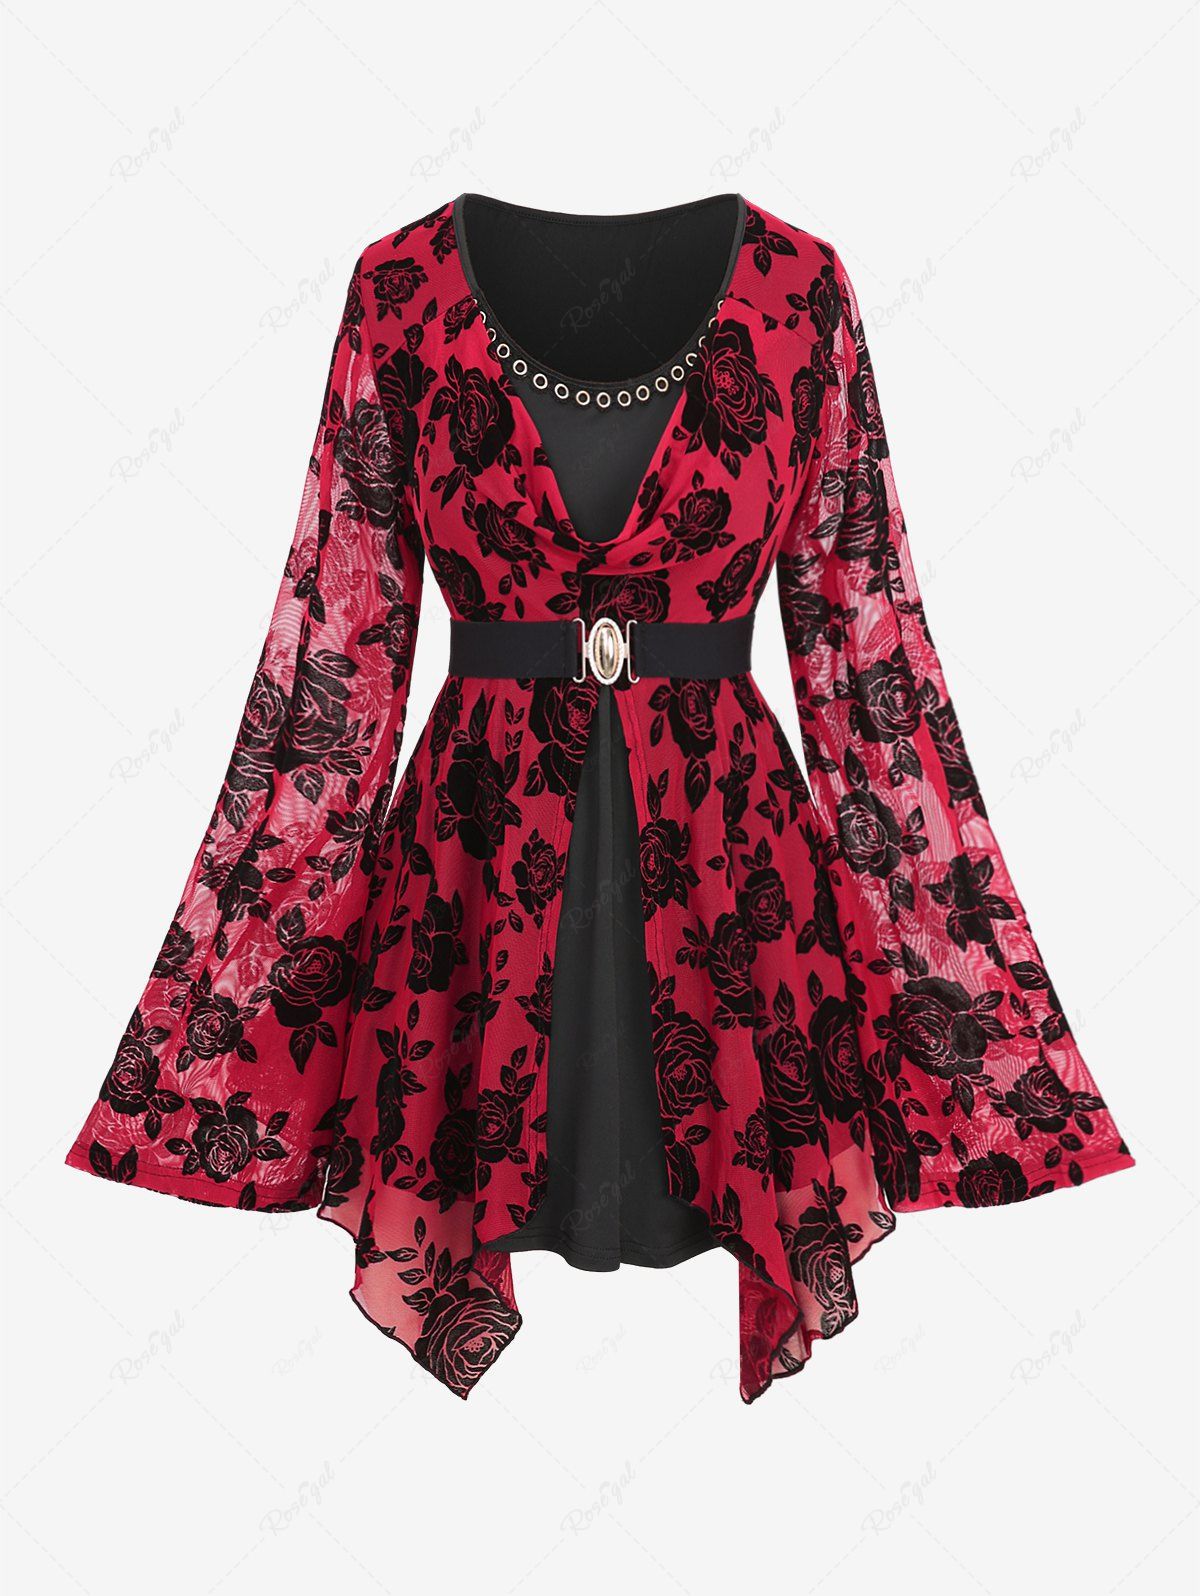 Buy Plus Size Cowl Neck Rose Flower Mesh Flocking Layered Ruched Grommet Belted 2 in 1 Bell Sleeve Top  